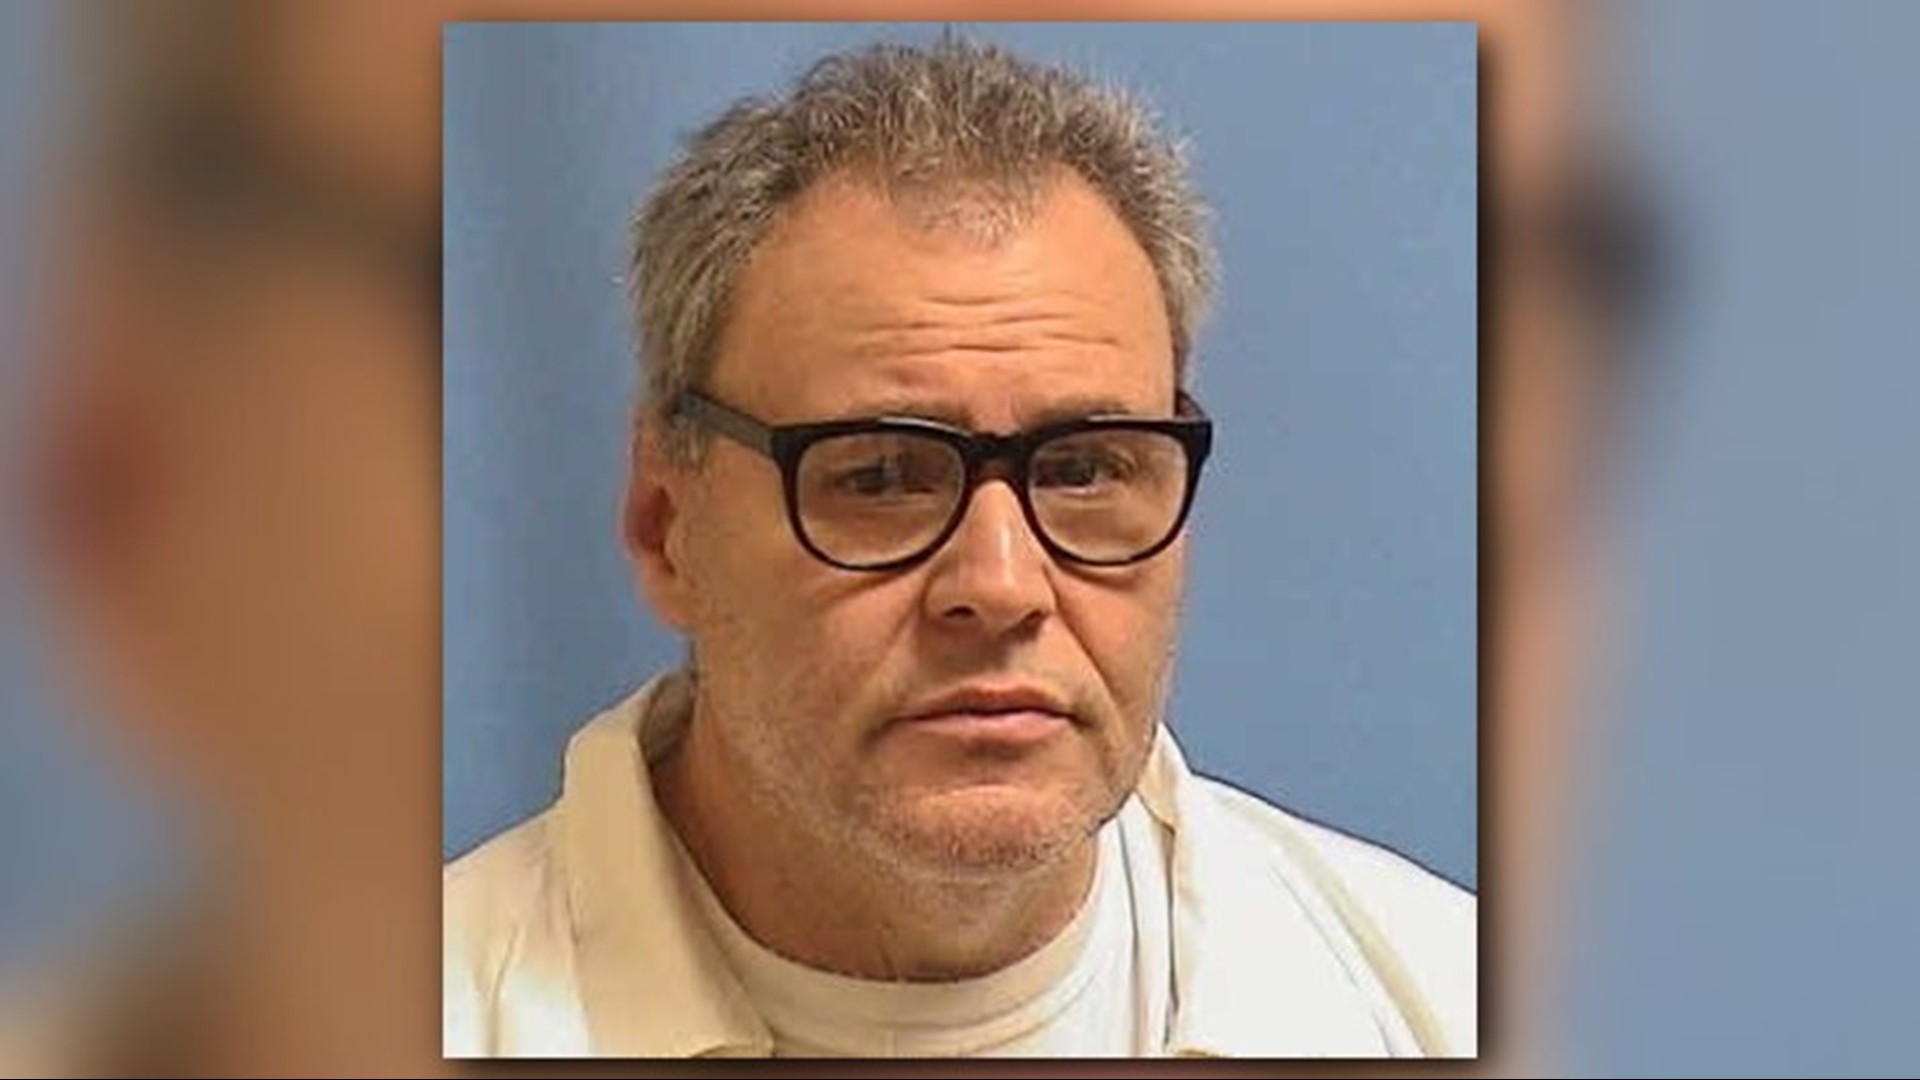 Inmate found dead of apparent suicide at Ouachita River Correctional